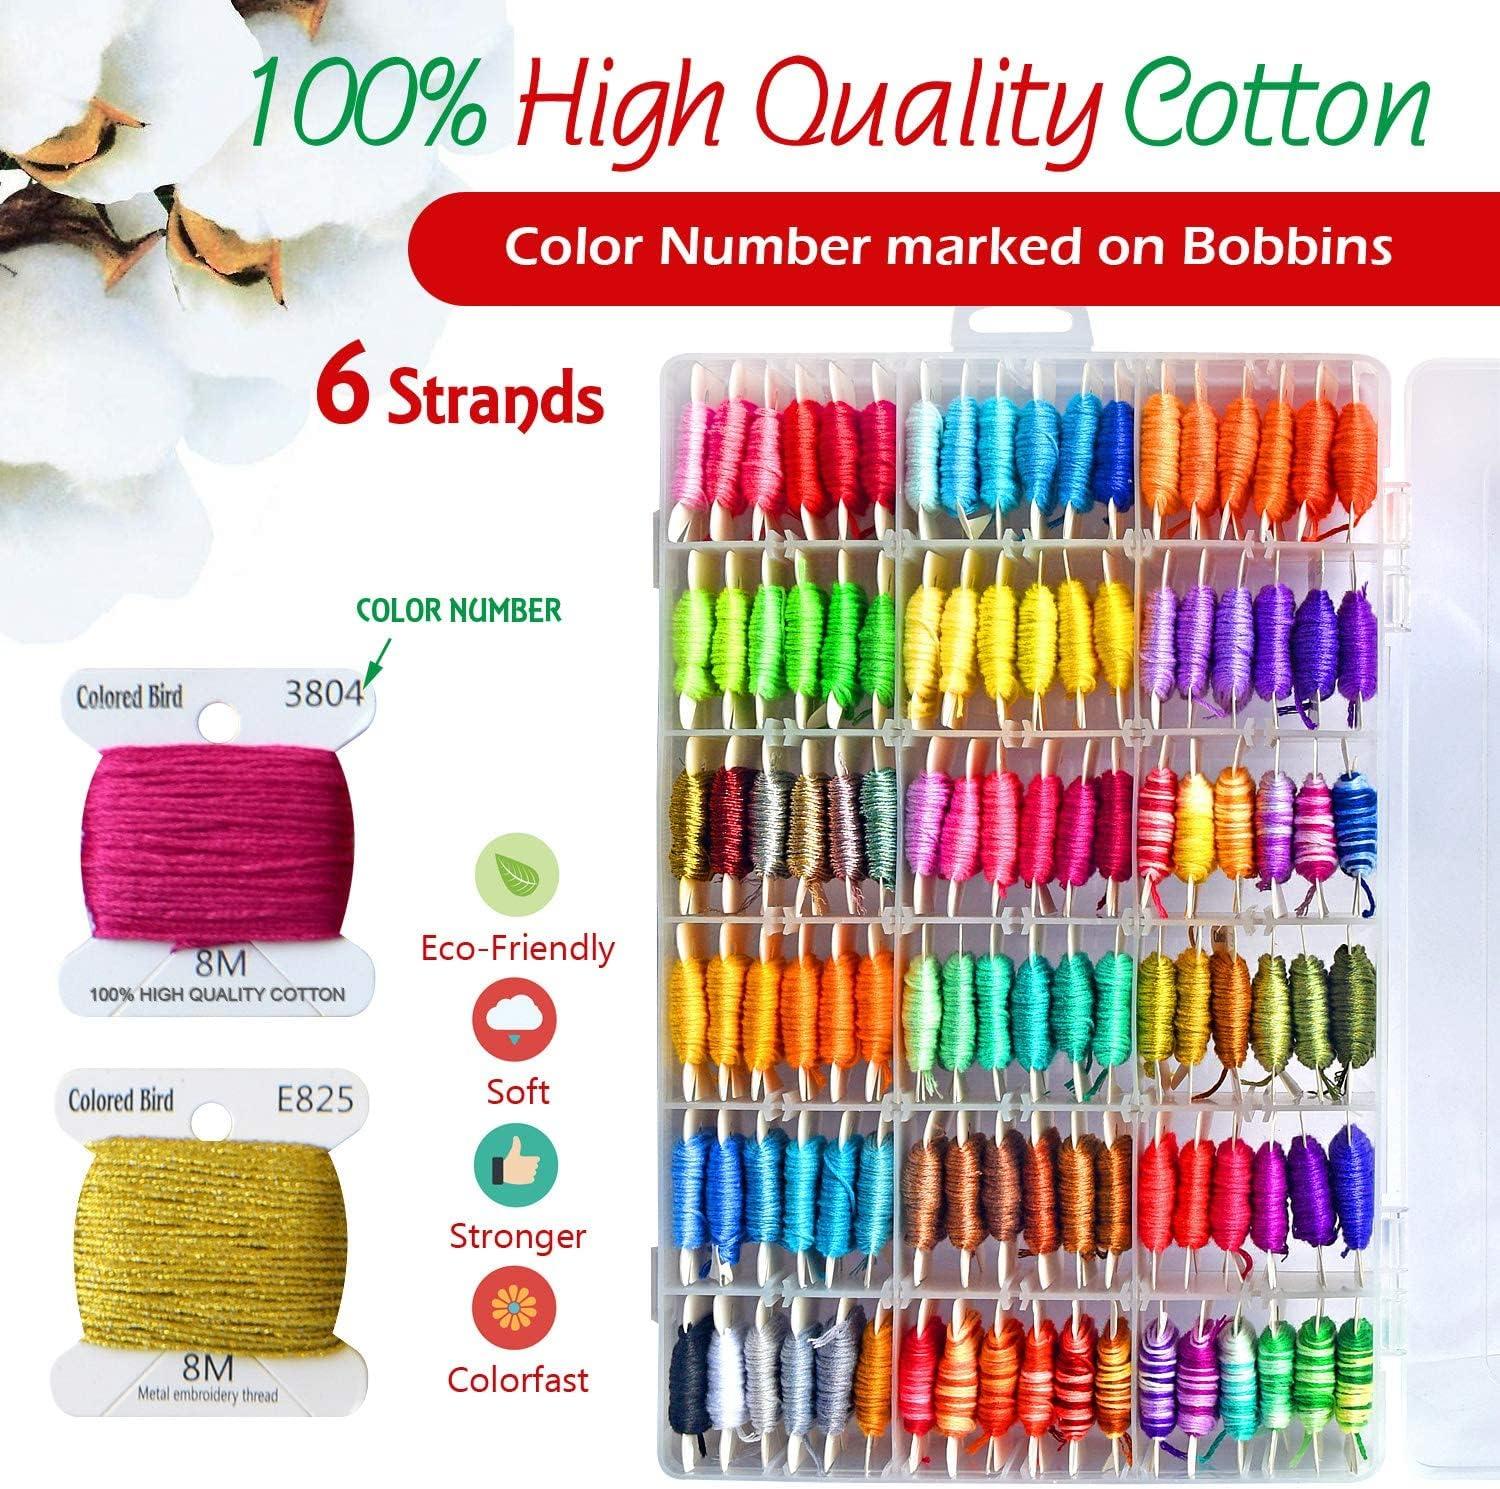 200 Colors Embroidery Thread Floss Set Including Cross Stitch